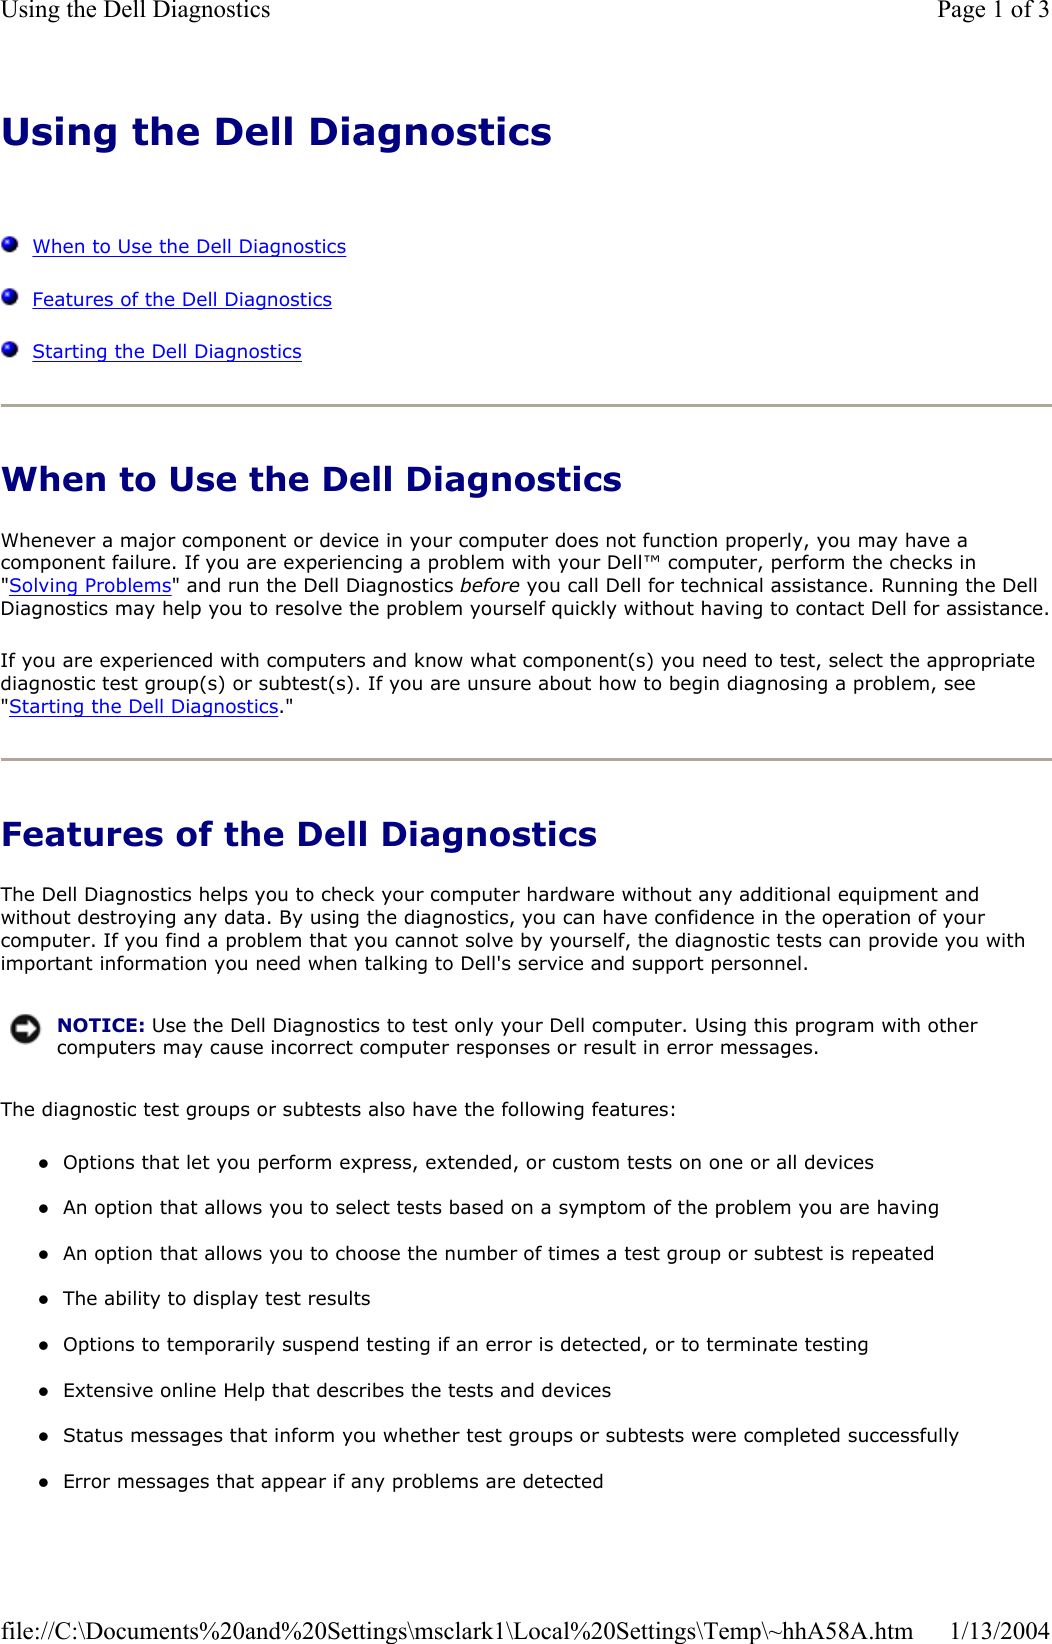 Using the Dell DiagnosticsWhen to Use the Dell DiagnosticsFeatures of the Dell DiagnosticsStarting the Dell DiagnosticsWhen to Use the Dell Diagnostics Whenever a major component or device in your computer does not function properly, you may have a component failure. If you are experiencing a problem with your Dell™ computer, perform the checks in &quot;Solving Problems&quot; and run the Dell Diagnostics before you call Dell for technical assistance. Running the Dell Diagnostics may help you to resolve the problem yourself quickly without having to contact Dell for assistance.If you are experienced with computers and know what component(s) you need to test, select the appropriate diagnostic test group(s) or subtest(s). If you are unsure about how to begin diagnosing a problem, see &quot;Starting the Dell Diagnostics.&quot;Features of the Dell Diagnostics The Dell Diagnostics helps you to check your computer hardware without any additional equipment and without destroying any data. By using the diagnostics, you can have confidence in the operation of your computer. If you find a problem that you cannot solve by yourself, the diagnostic tests can provide you with important information you need when talking to Dell&apos;s service and support personnel. The diagnostic test groups or subtests also have the following features: zOptions that let you perform express, extended, or custom tests on one or all devices zAn option that allows you to select tests based on a symptom of the problem you are having zAn option that allows you to choose the number of times a test group or subtest is repeated zThe ability to display test results zOptions to temporarily suspend testing if an error is detected, or to terminate testing zExtensive online Help that describes the tests and devices zStatus messages that inform you whether test groups or subtests were completed successfully zError messages that appear if any problems are detected NOTICE: Use the Dell Diagnostics to test only your Dell computer. Using this program with other computers may cause incorrect computer responses or result in error messages.Page 1 of 3Using the Dell Diagnostics1/13/2004file://C:\Documents%20and%20Settings\msclark1\Local%20Settings\Temp\~hhA58A.htm